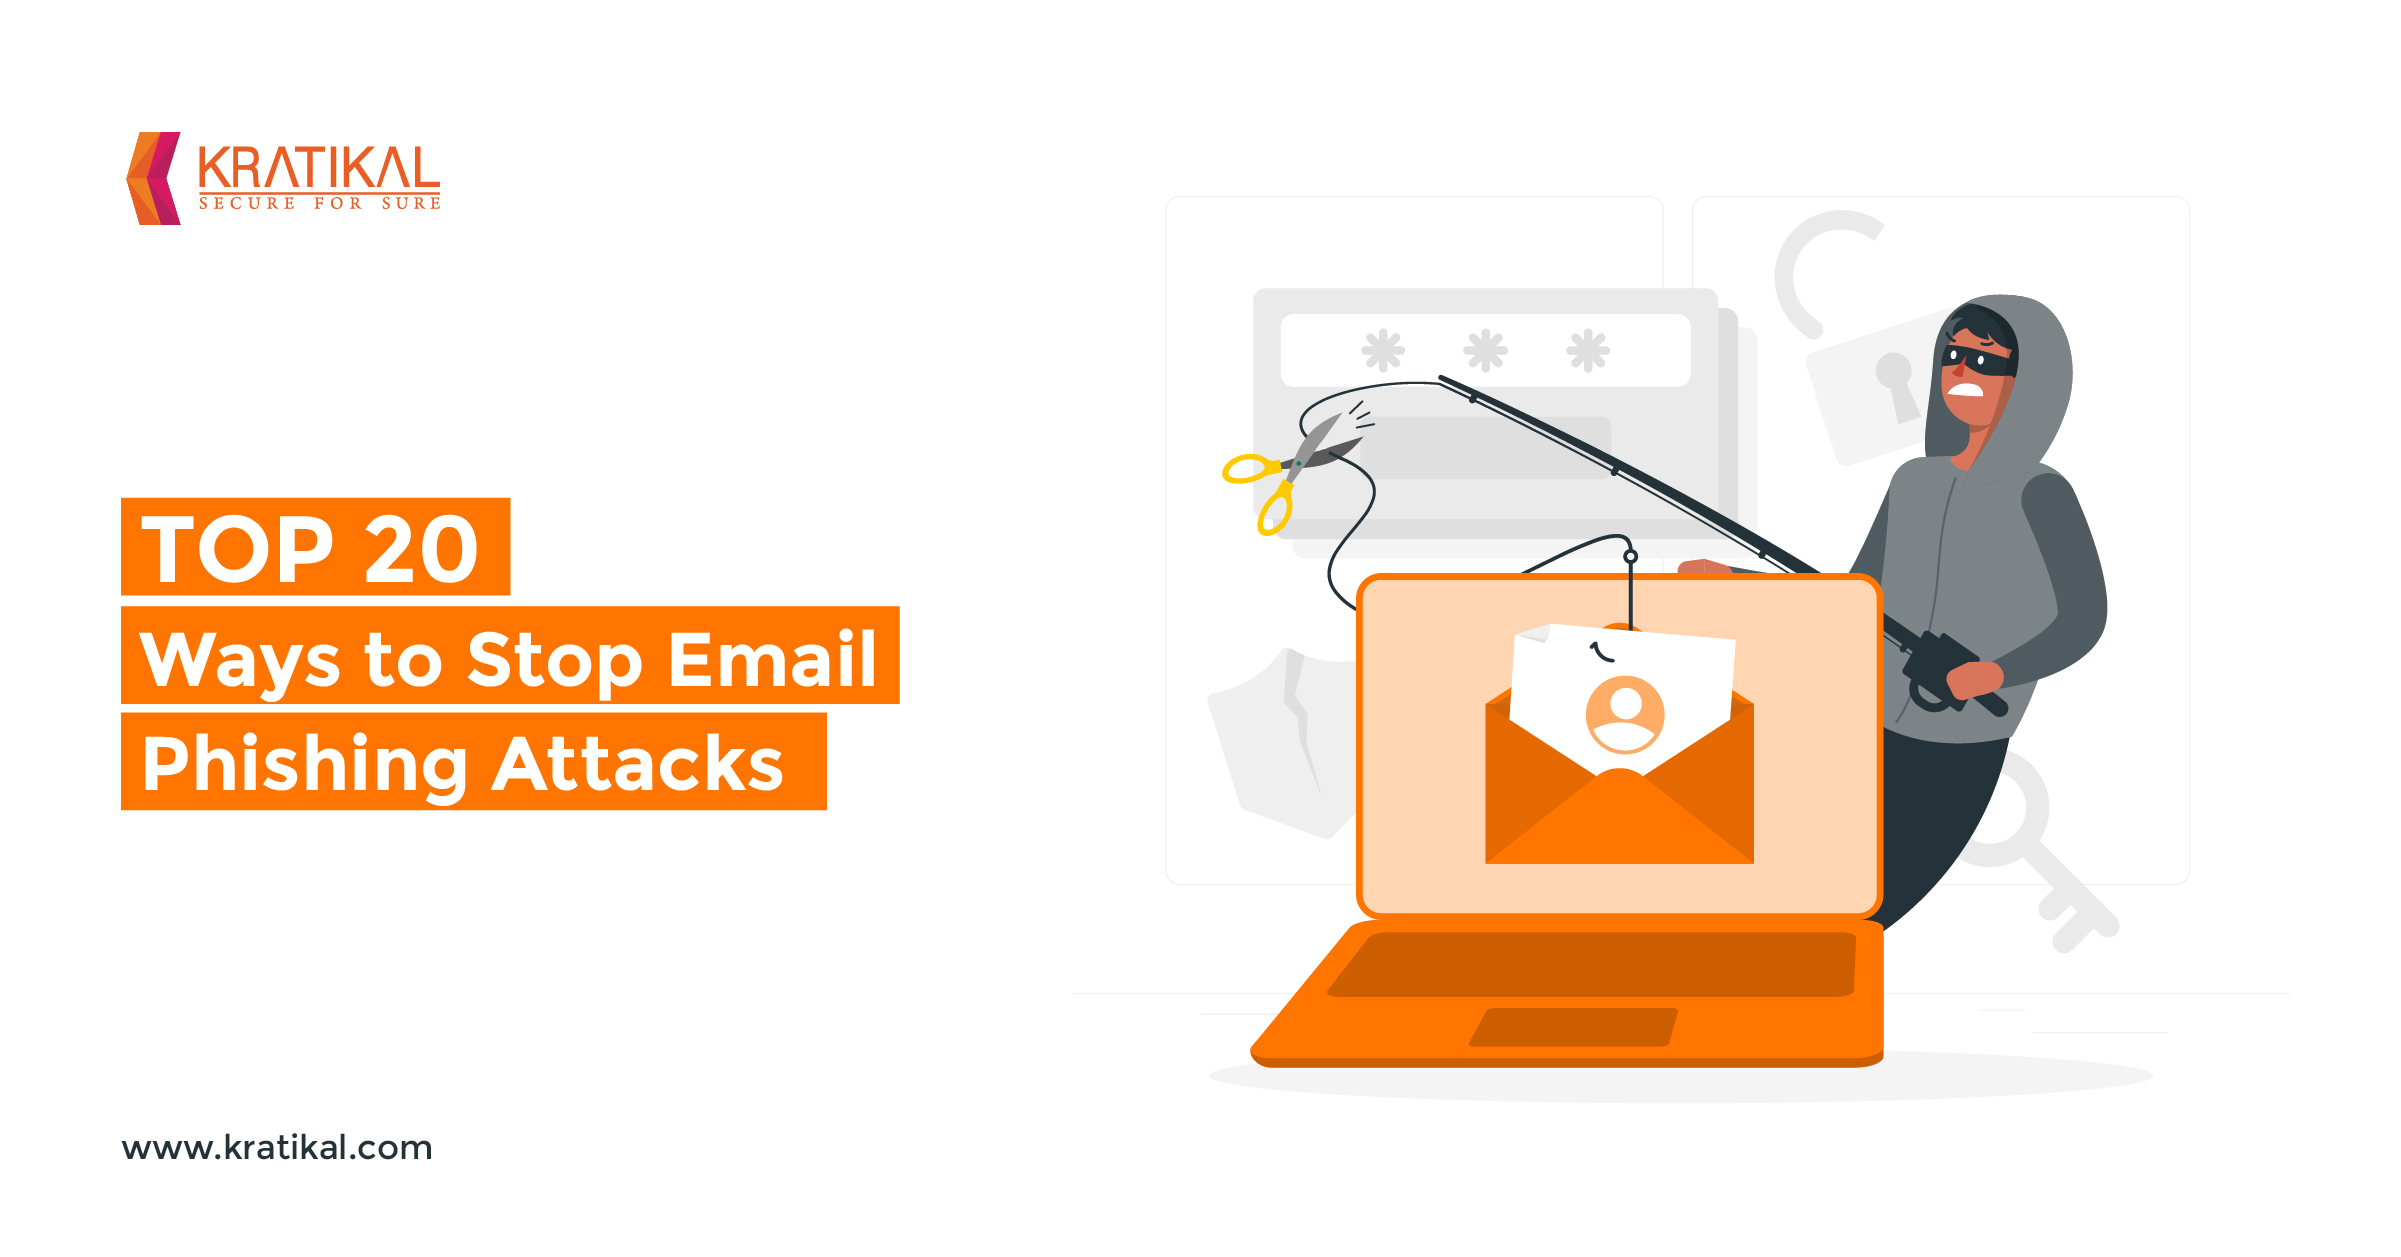 Top 20 ways to stop email phishing attacks